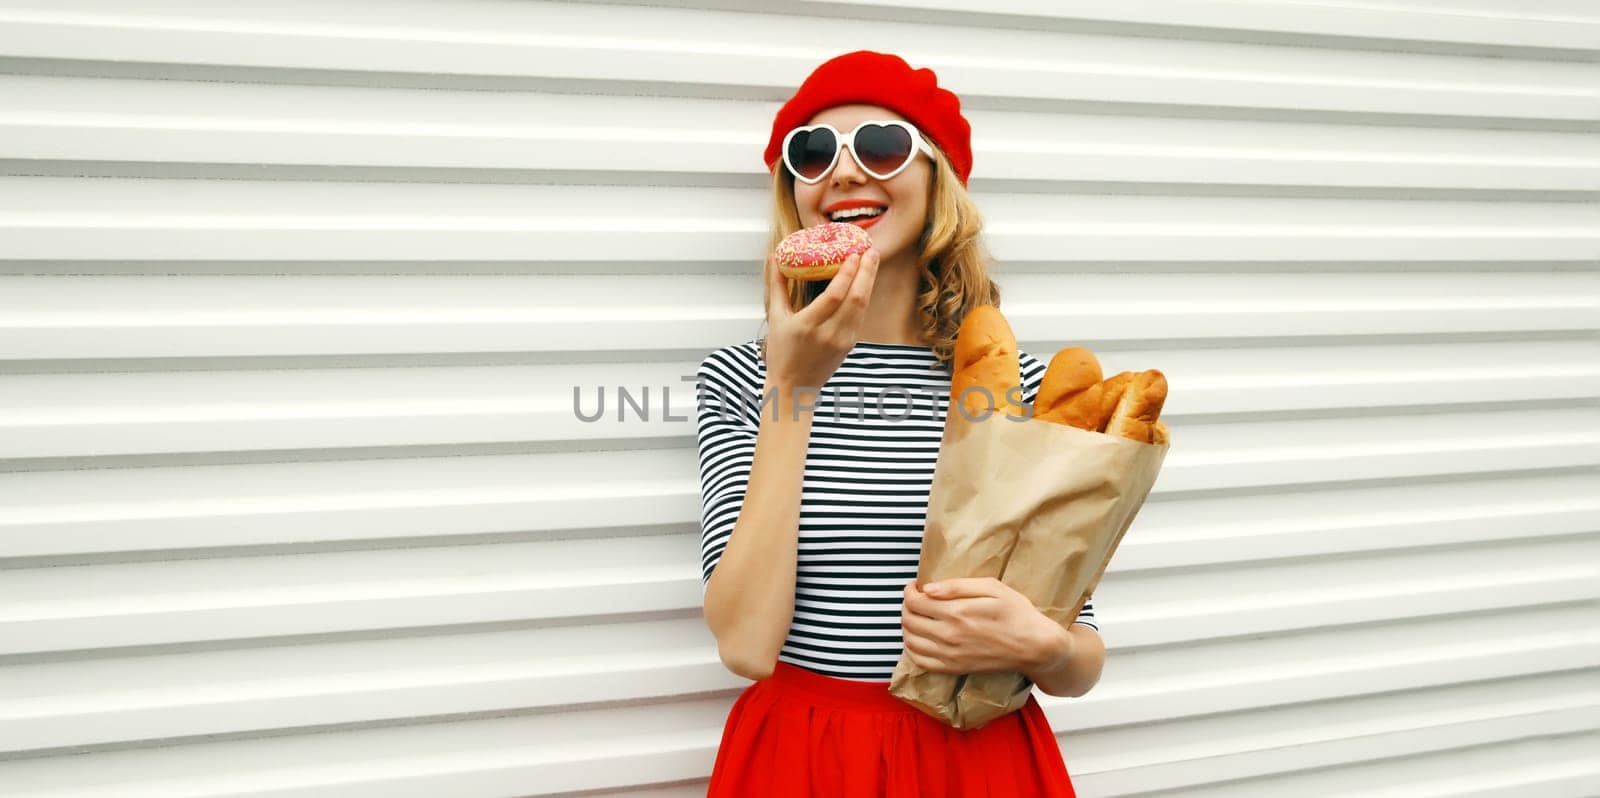 Portrait of happy smiling woman holding grocery shopping paper bag with fresh long white bread baguette eating sweet donut, wear french beret on white background